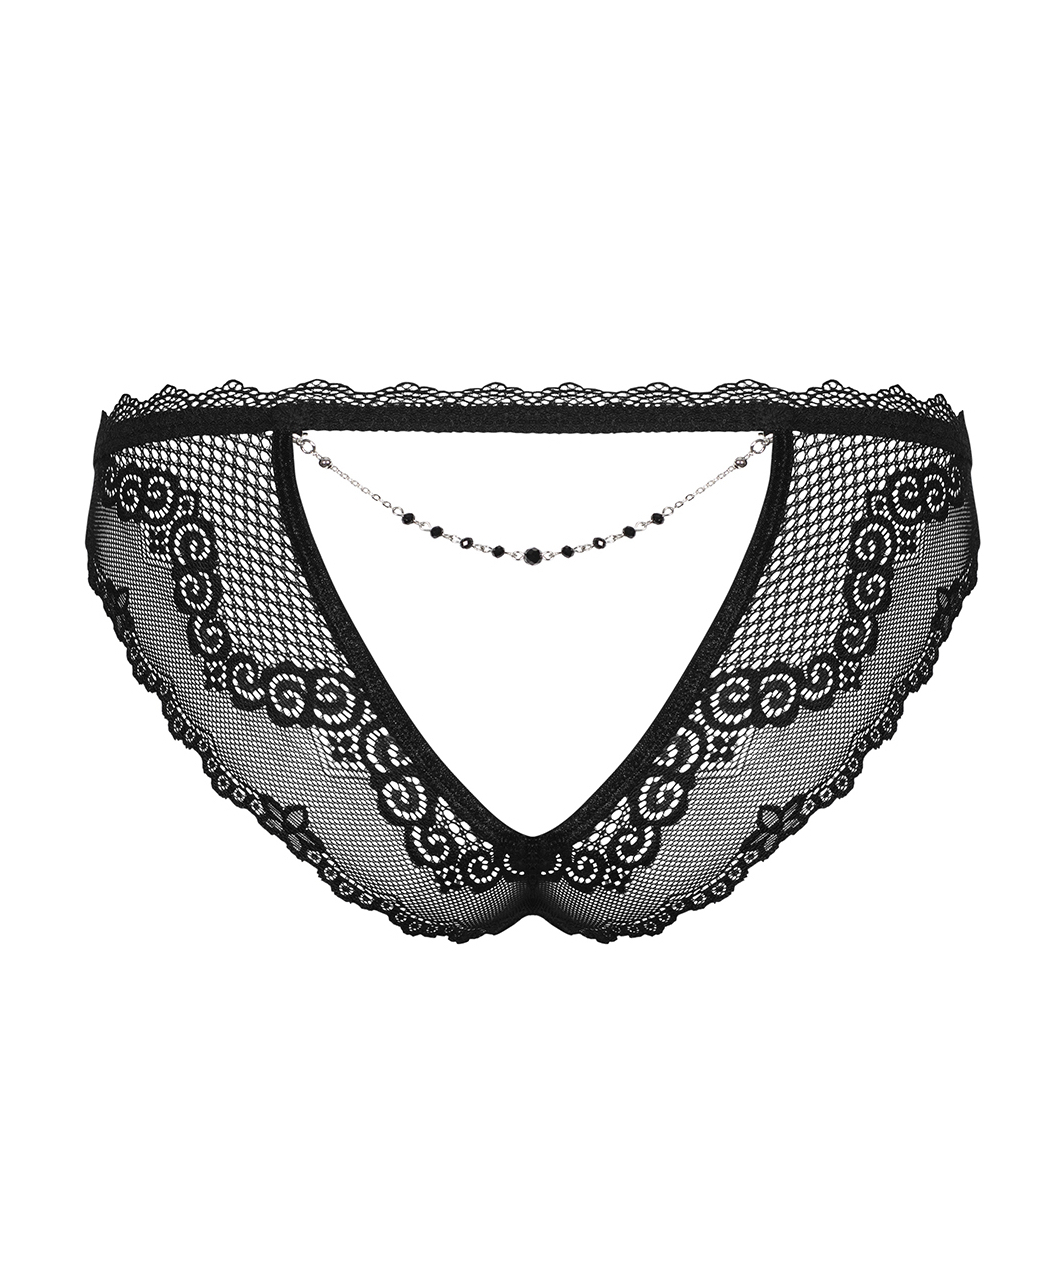 Obsessive Millagro black net panties with cutouts